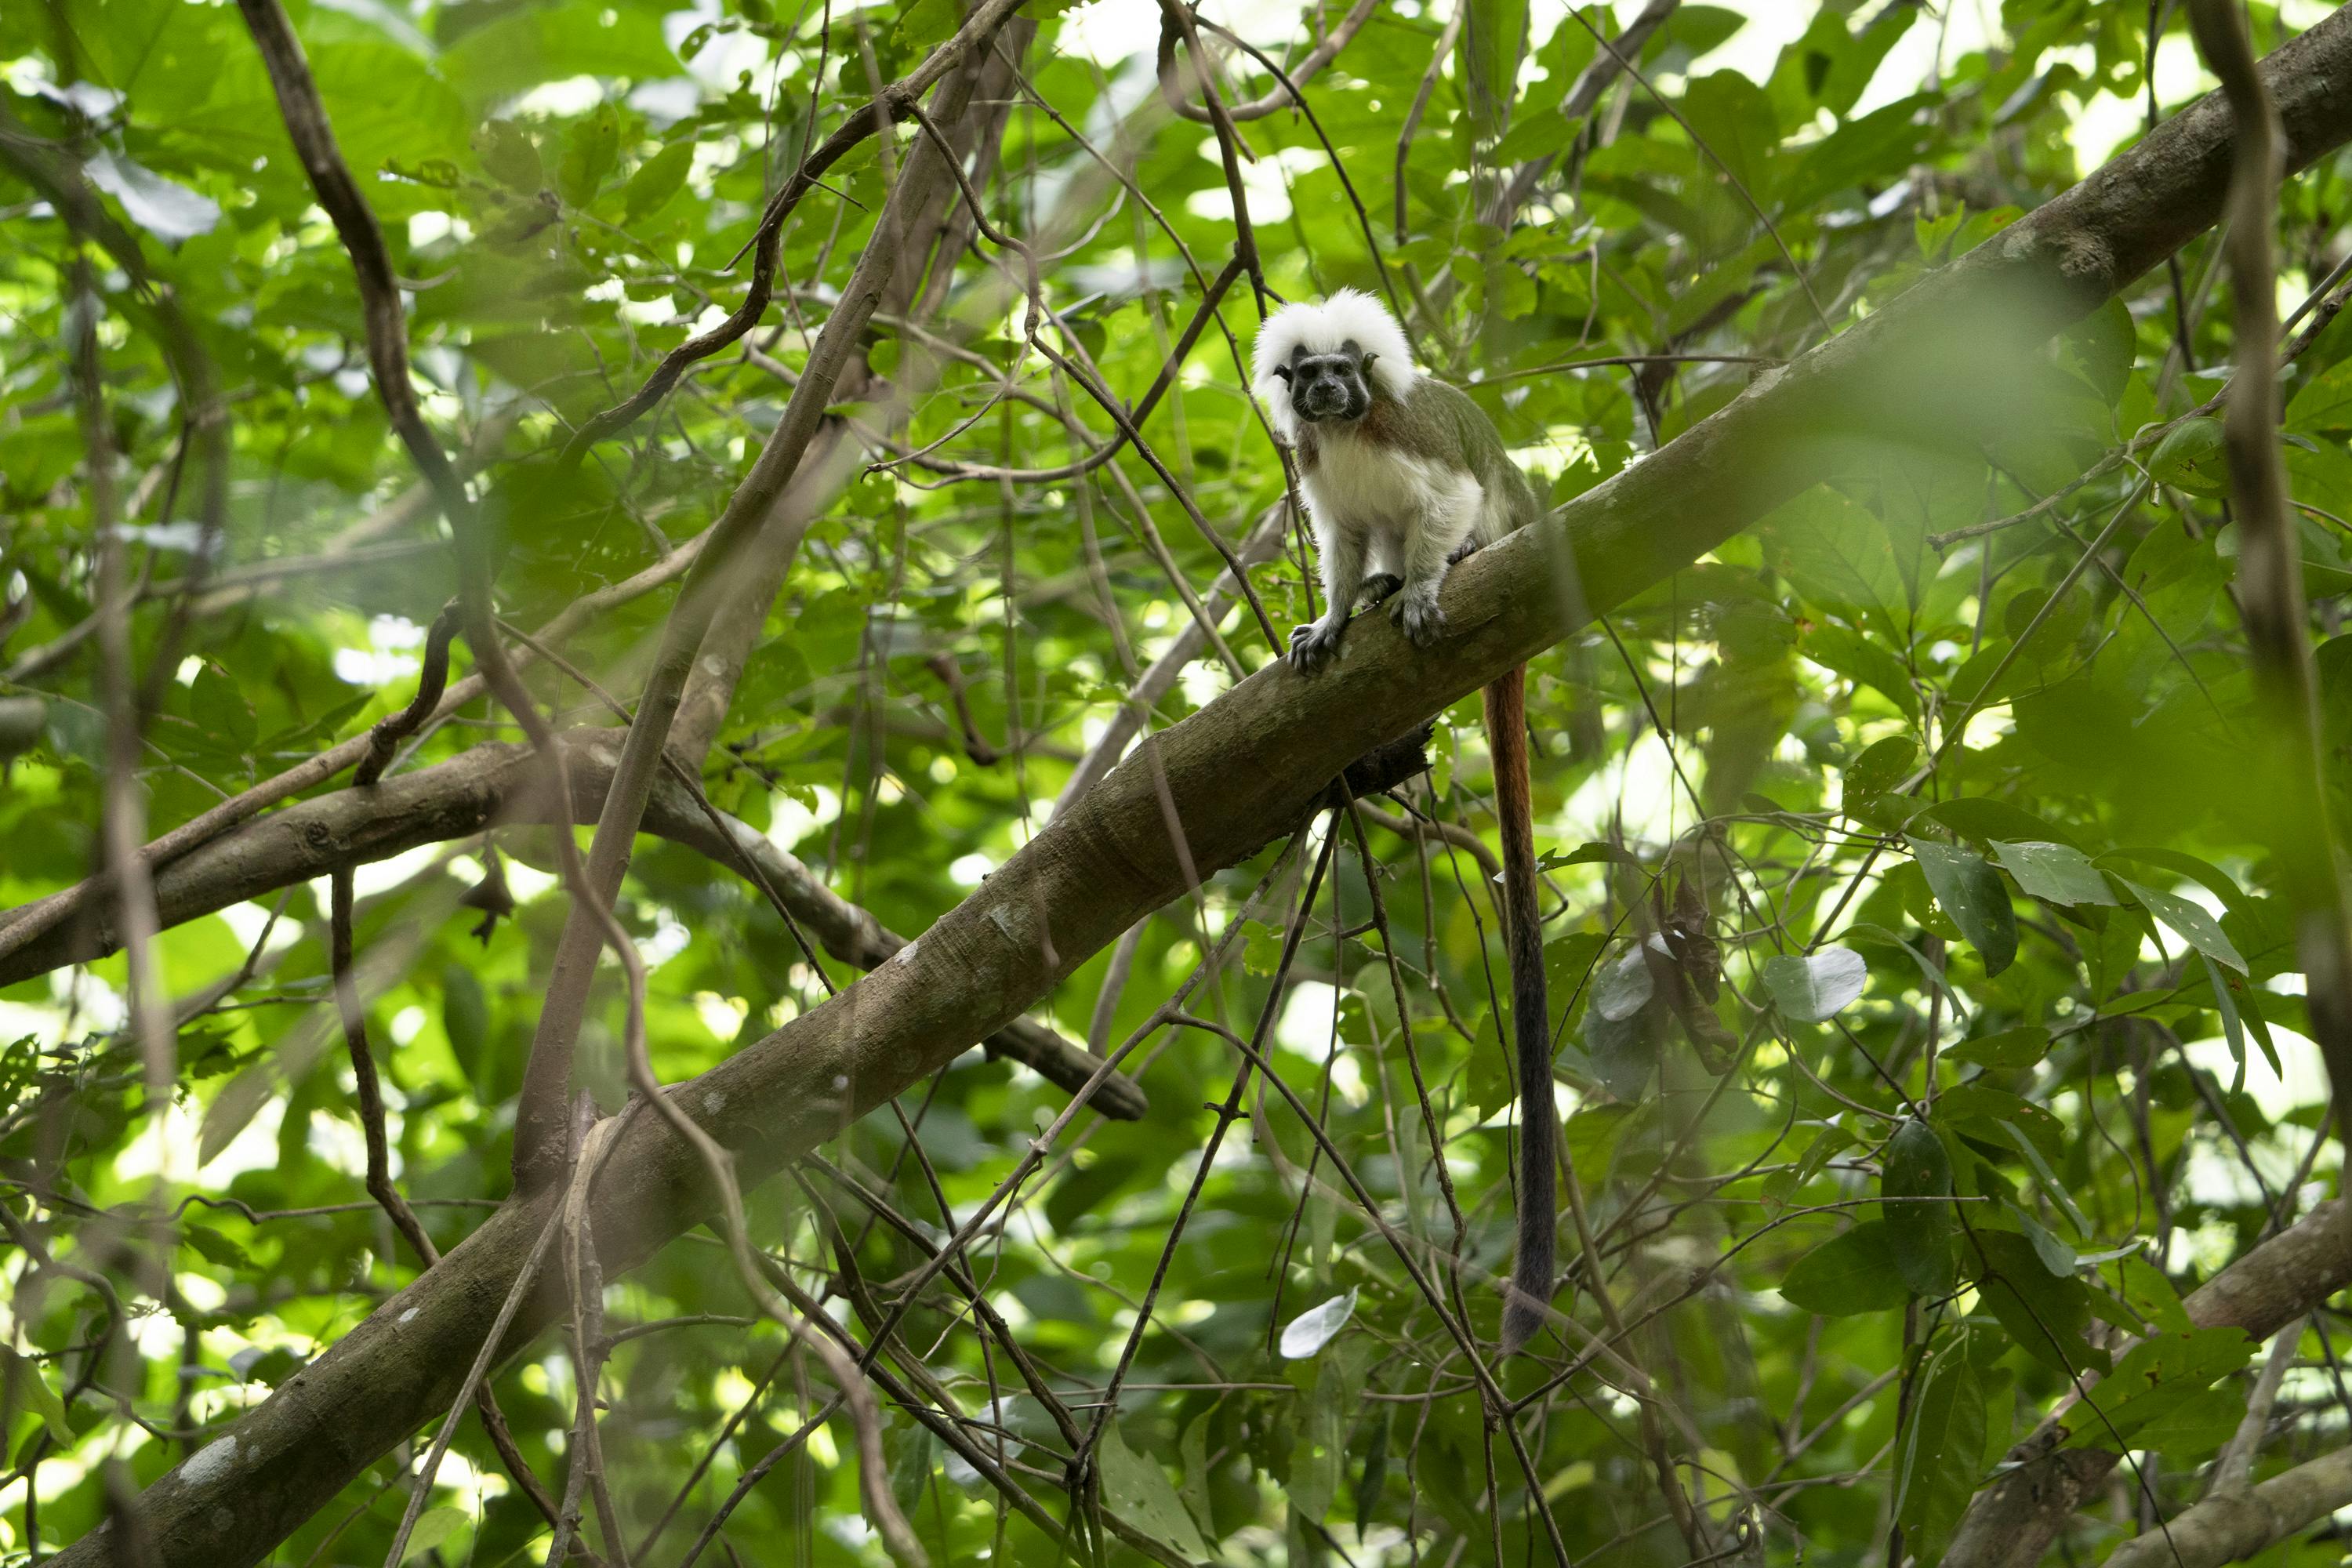 Cotton-top tamarins feed from more than 50 different trees in the forest (mostly fruits but also nectar and sap), becoming important seed dispersers to keep their forest healthy.